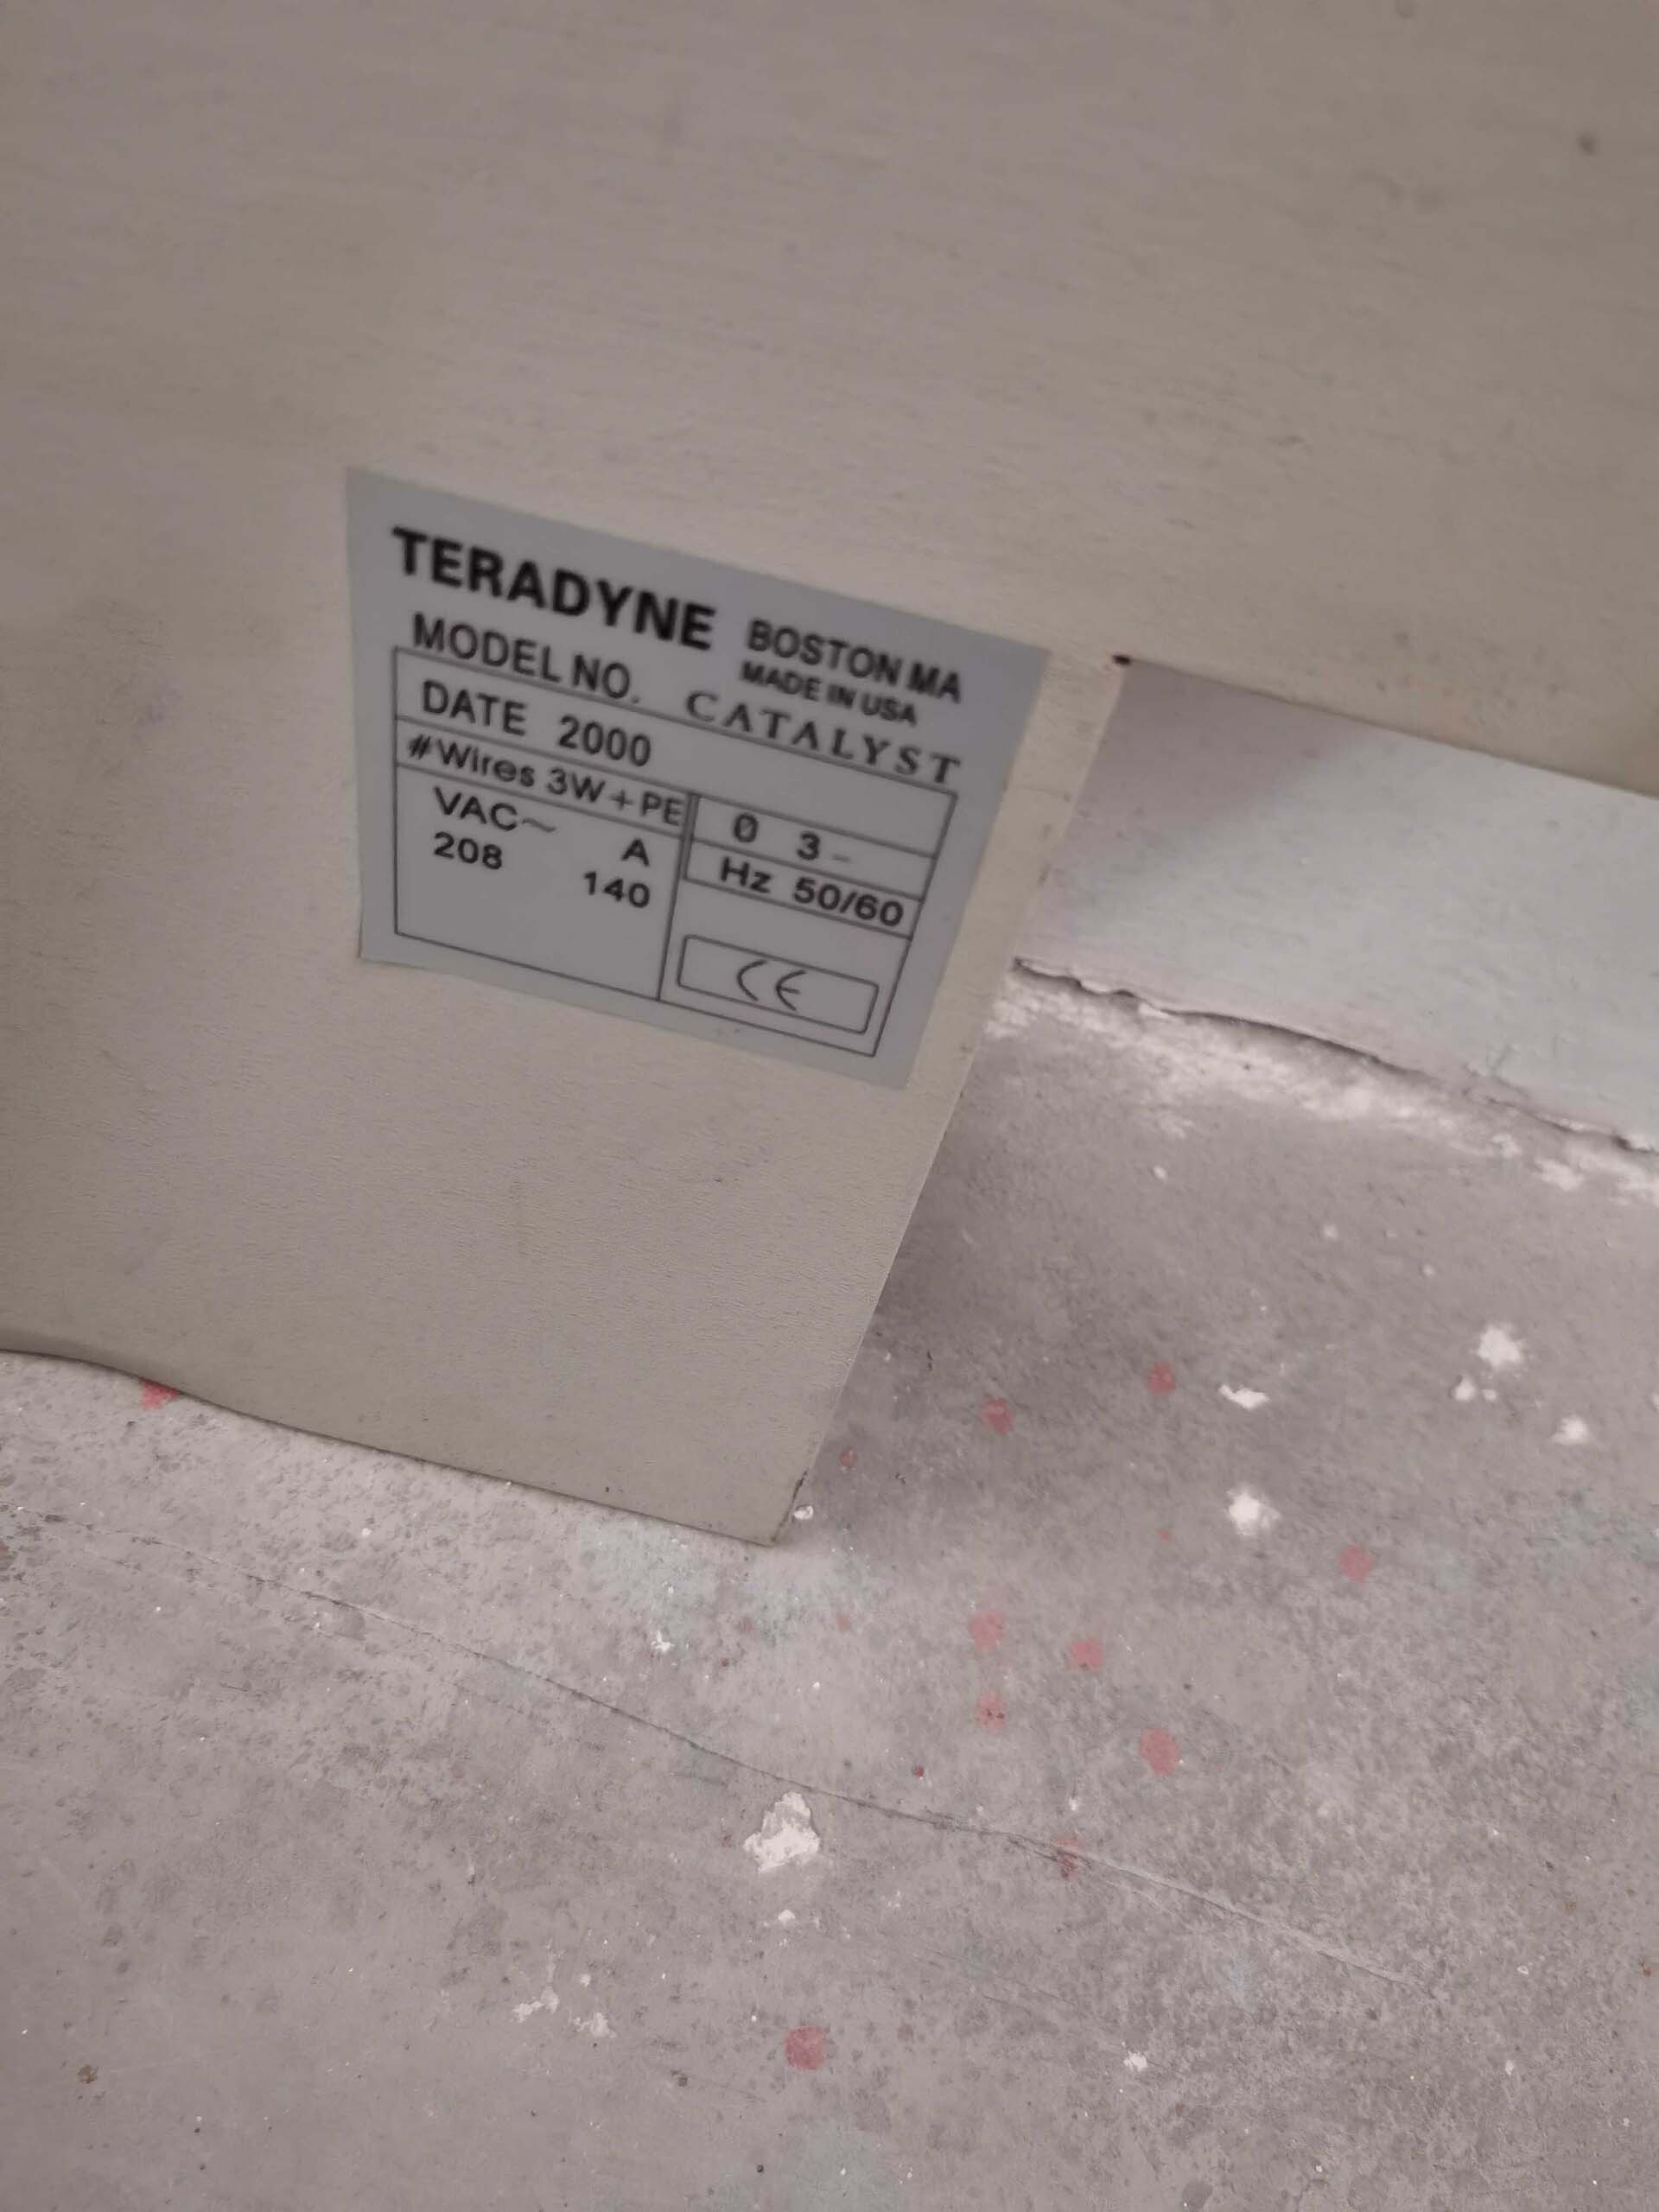 Photo Used TERADYNE Catalyst For Sale